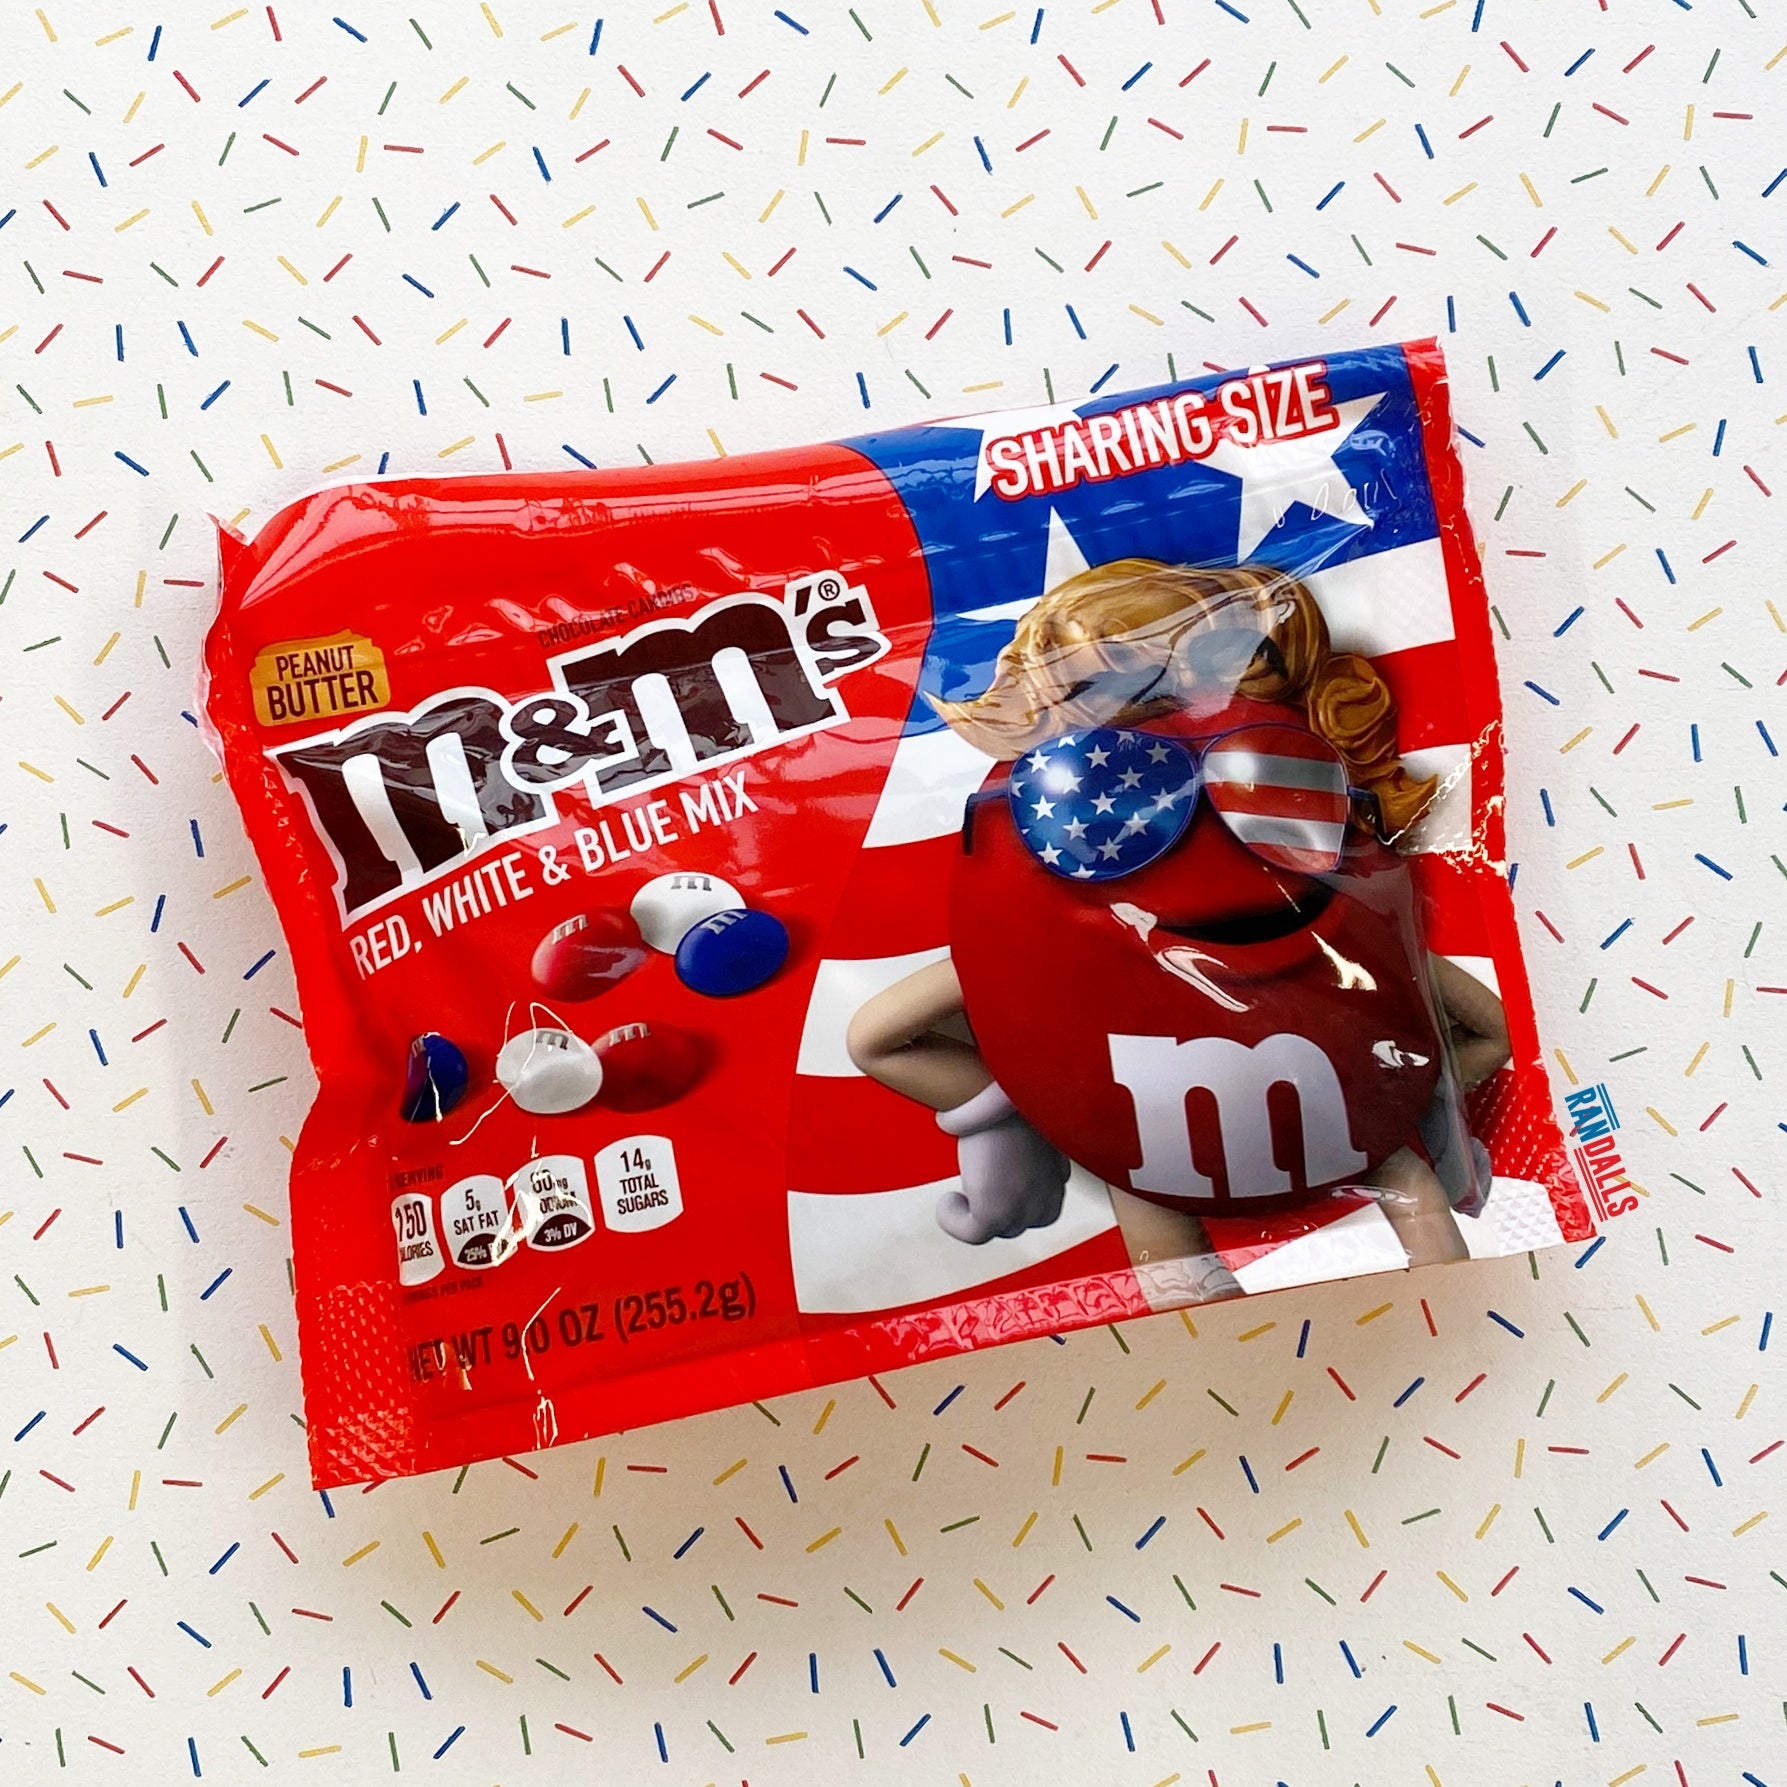 m&m's red white and blue peanut butter sharing size, chocolate, peanuts, usa, patriotic, candy, randalls